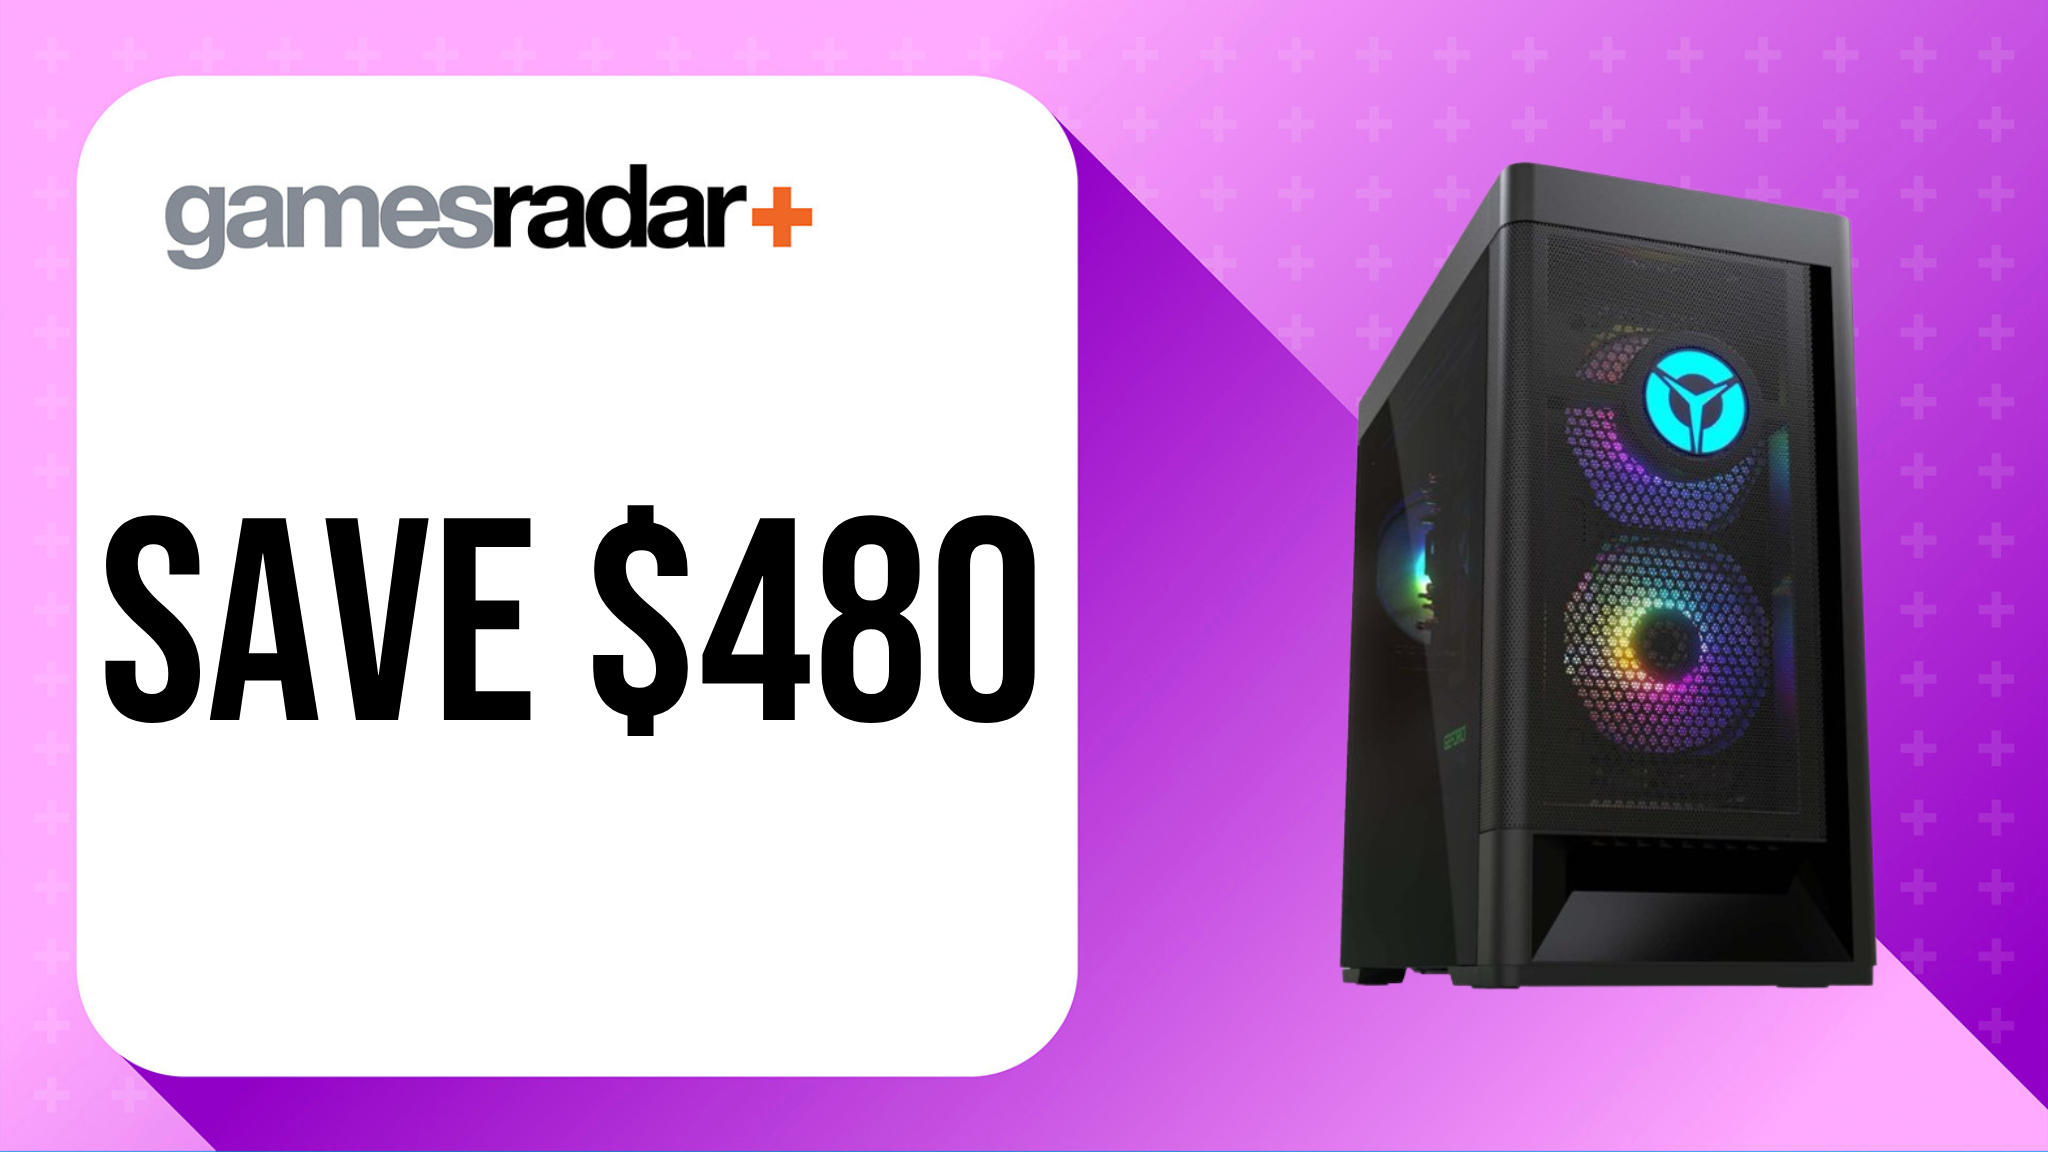 Lenovo legion tower deal image with $480 saving stamp and purple background